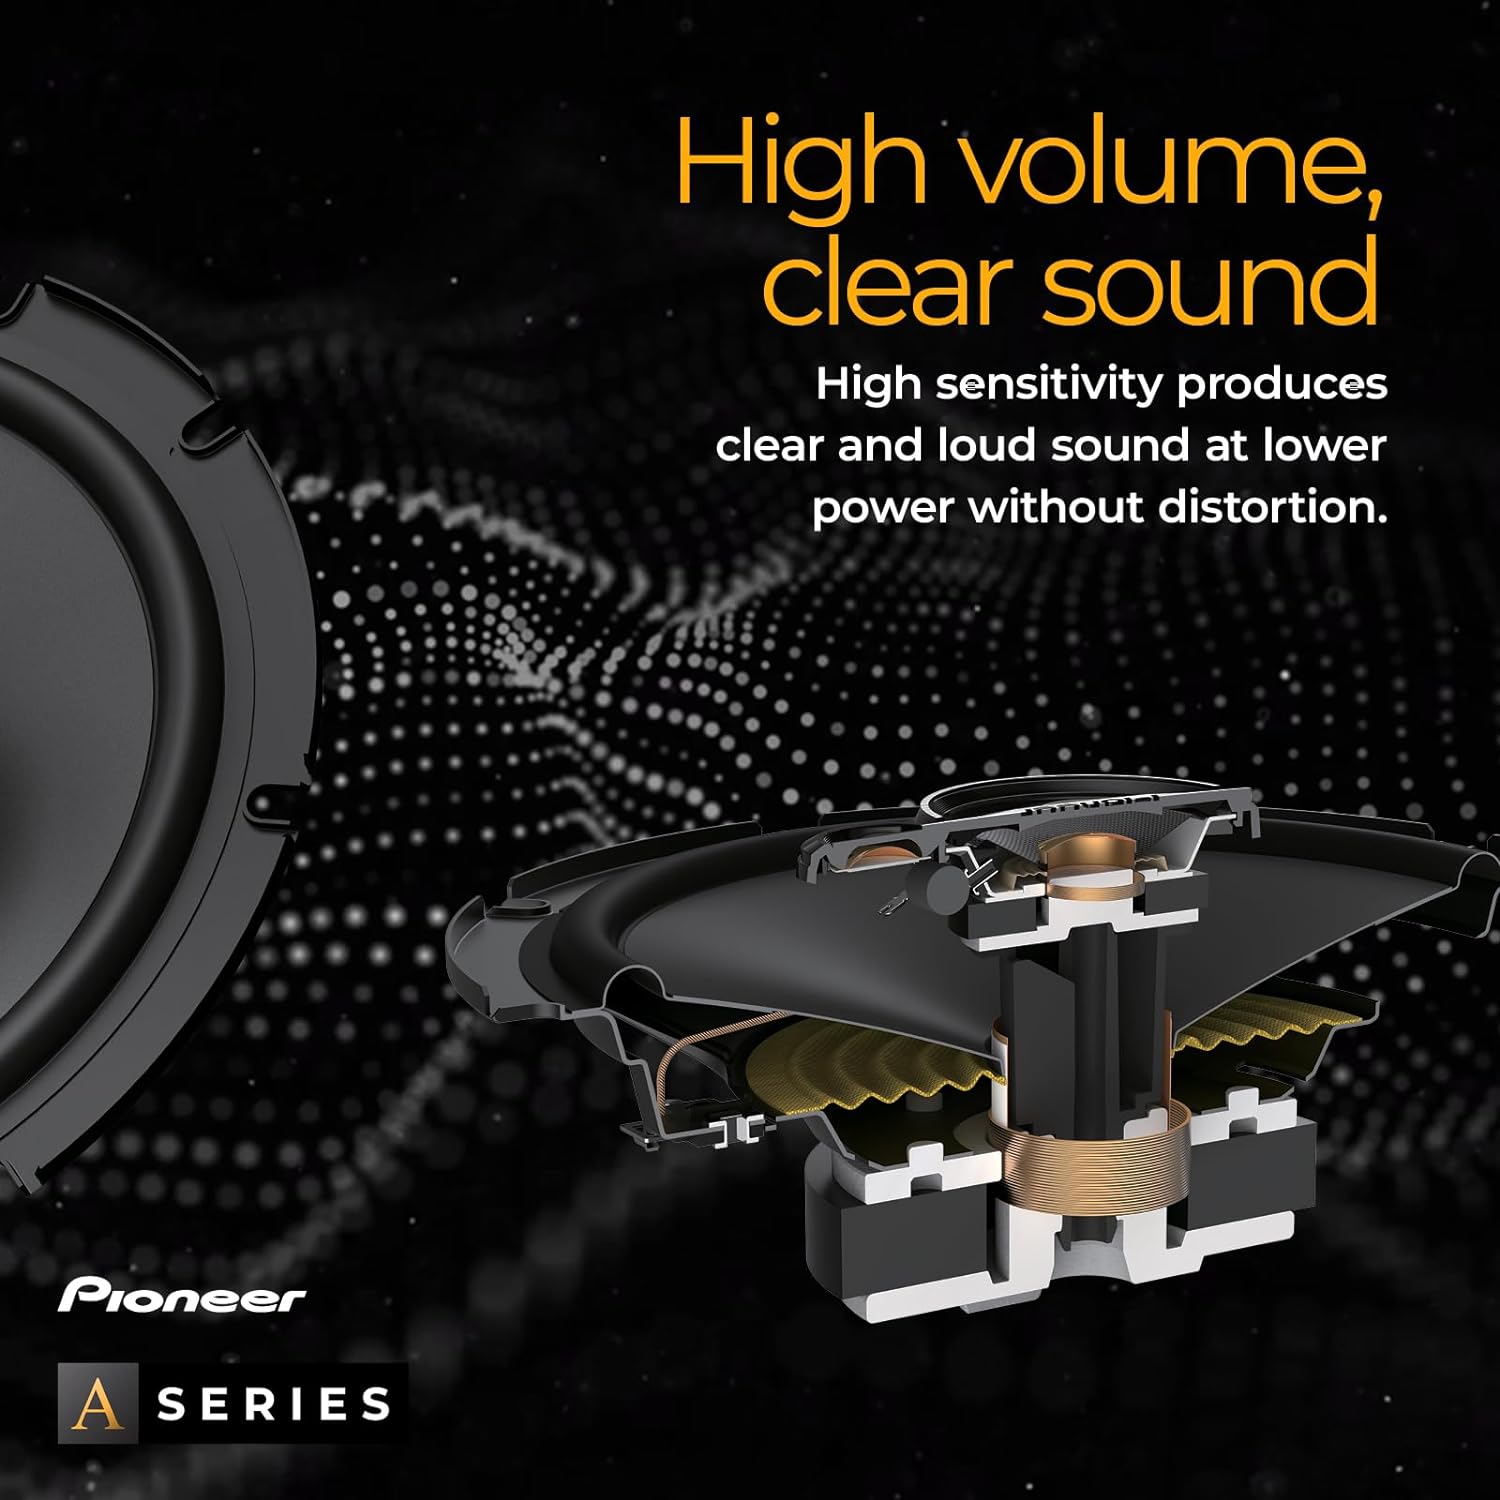 PIONEER A-Series TS-A6881F, 4-Way Coaxial Car Audio Speakers, Full Range, Clear Sound Quality, Easy Installation and Enhanced Bass Response, Black 6\u201D x 8\u201D Oval Speakers